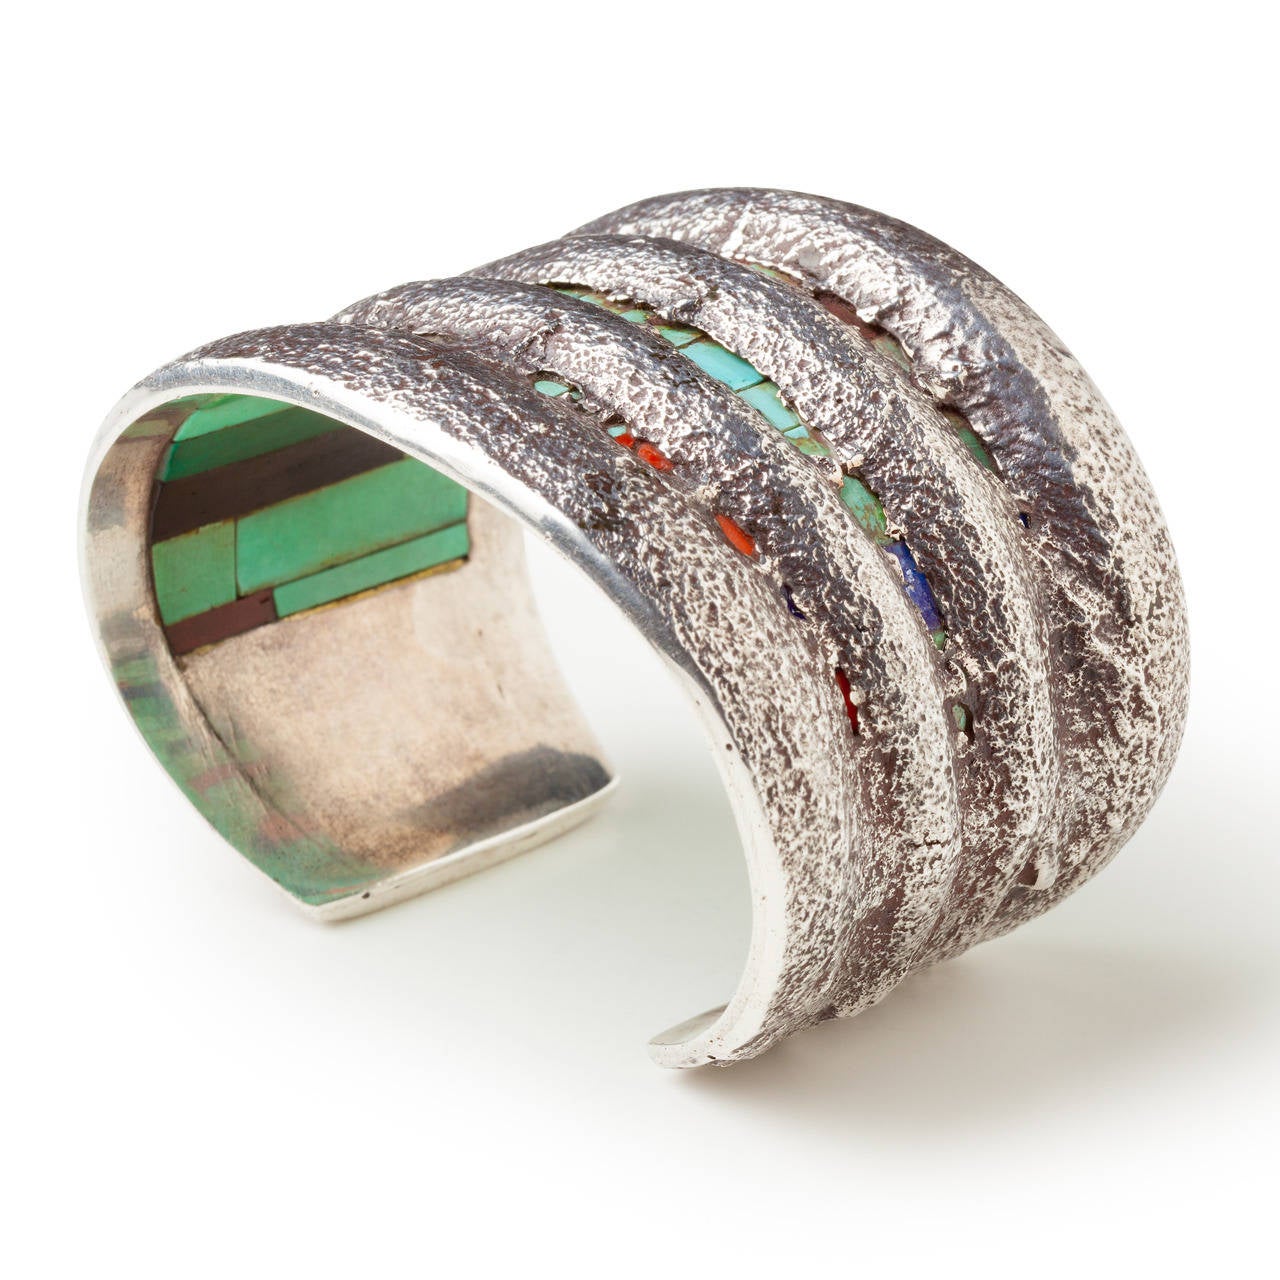 An astonishing example of the work of Charles Loloma, this bracelet demonstrates both his mastery of silversmithing as well as his unsurpassed lapidary work. Constructed of tufa cast silver, and inlaid with 51 pieces of hand-cut turquoise, lapis,